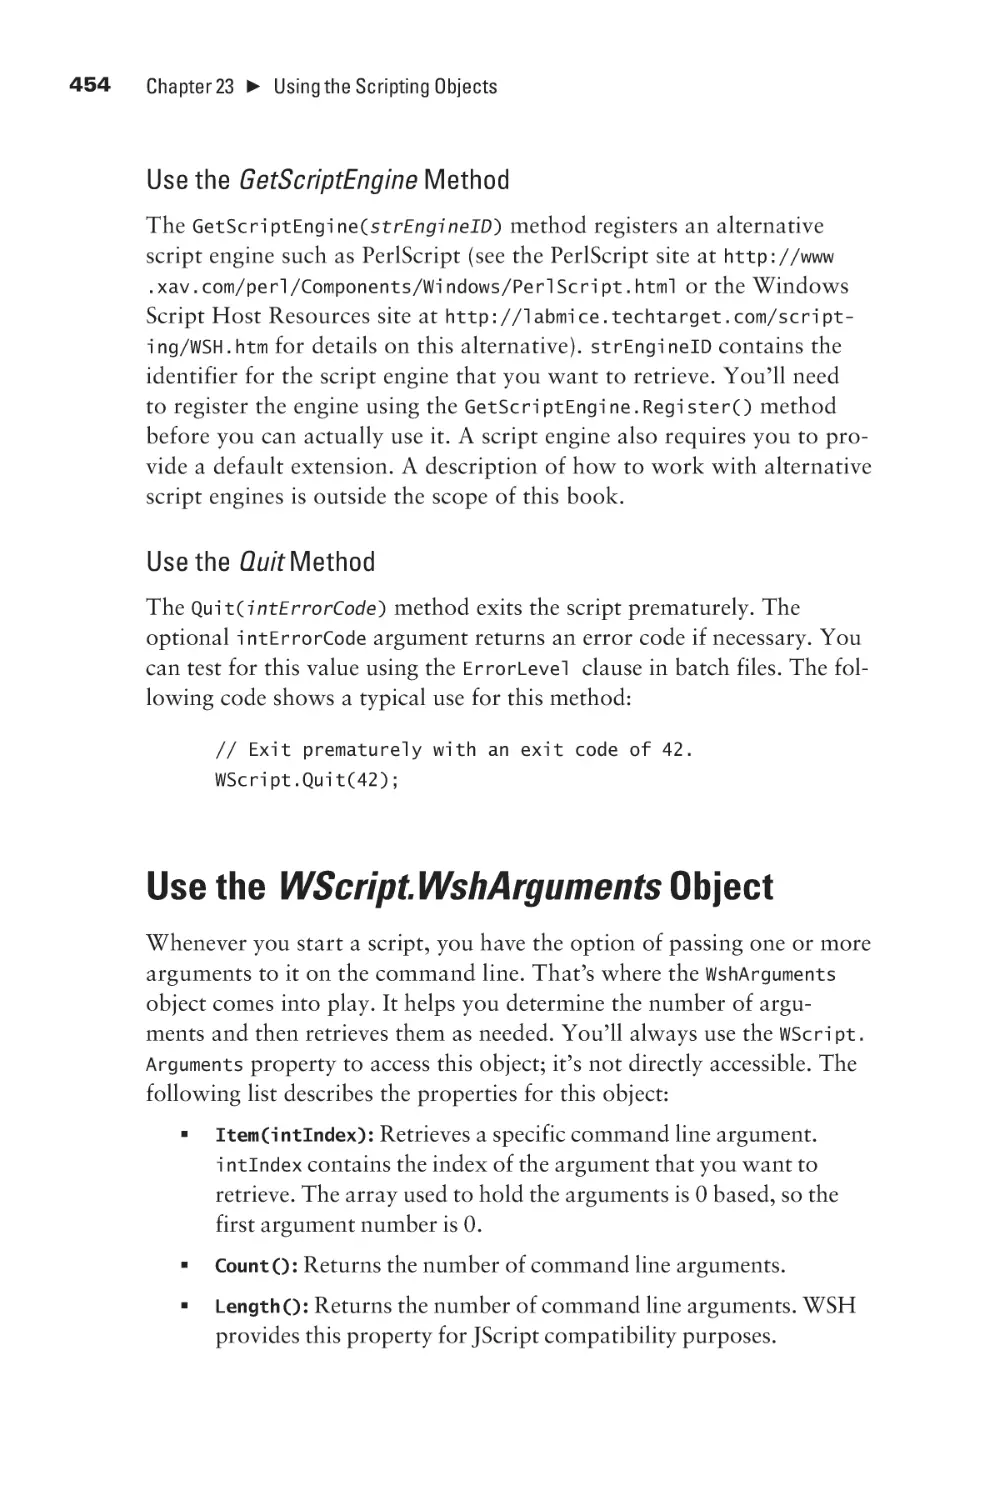 Use the WScript.WshArguments Object